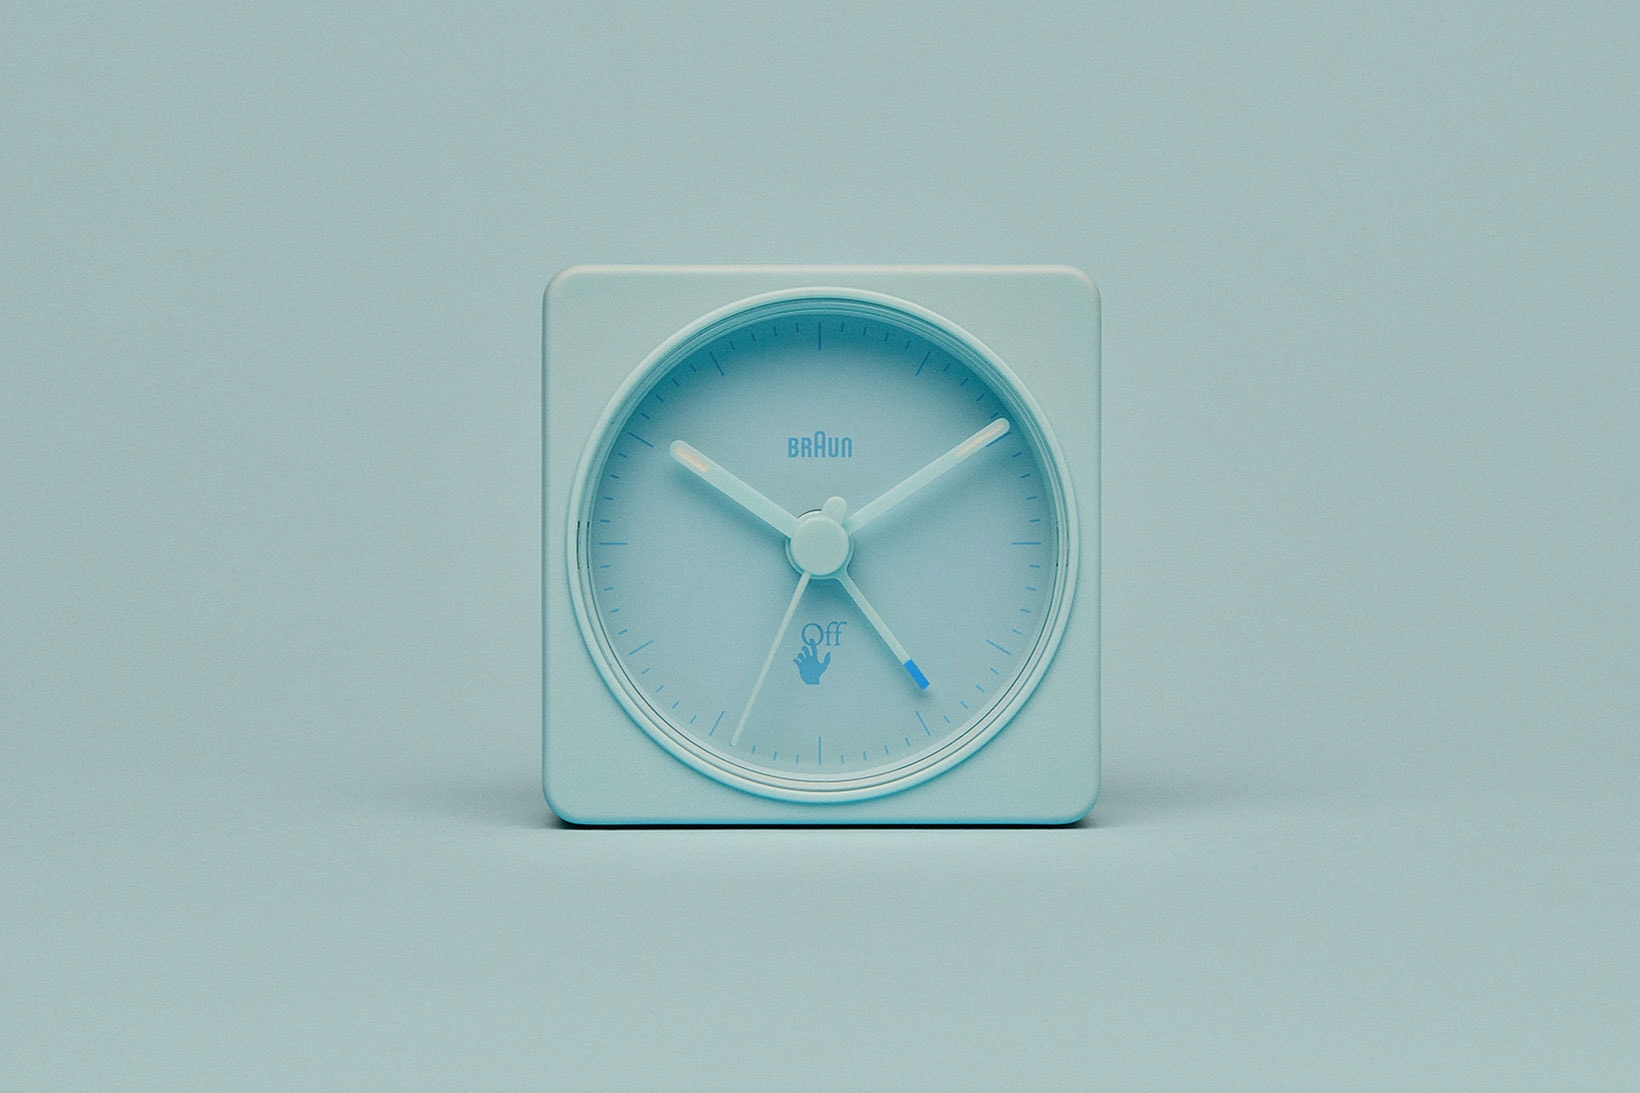 Functional Art” by Braun and Virgil Abloh - Co-Created for the